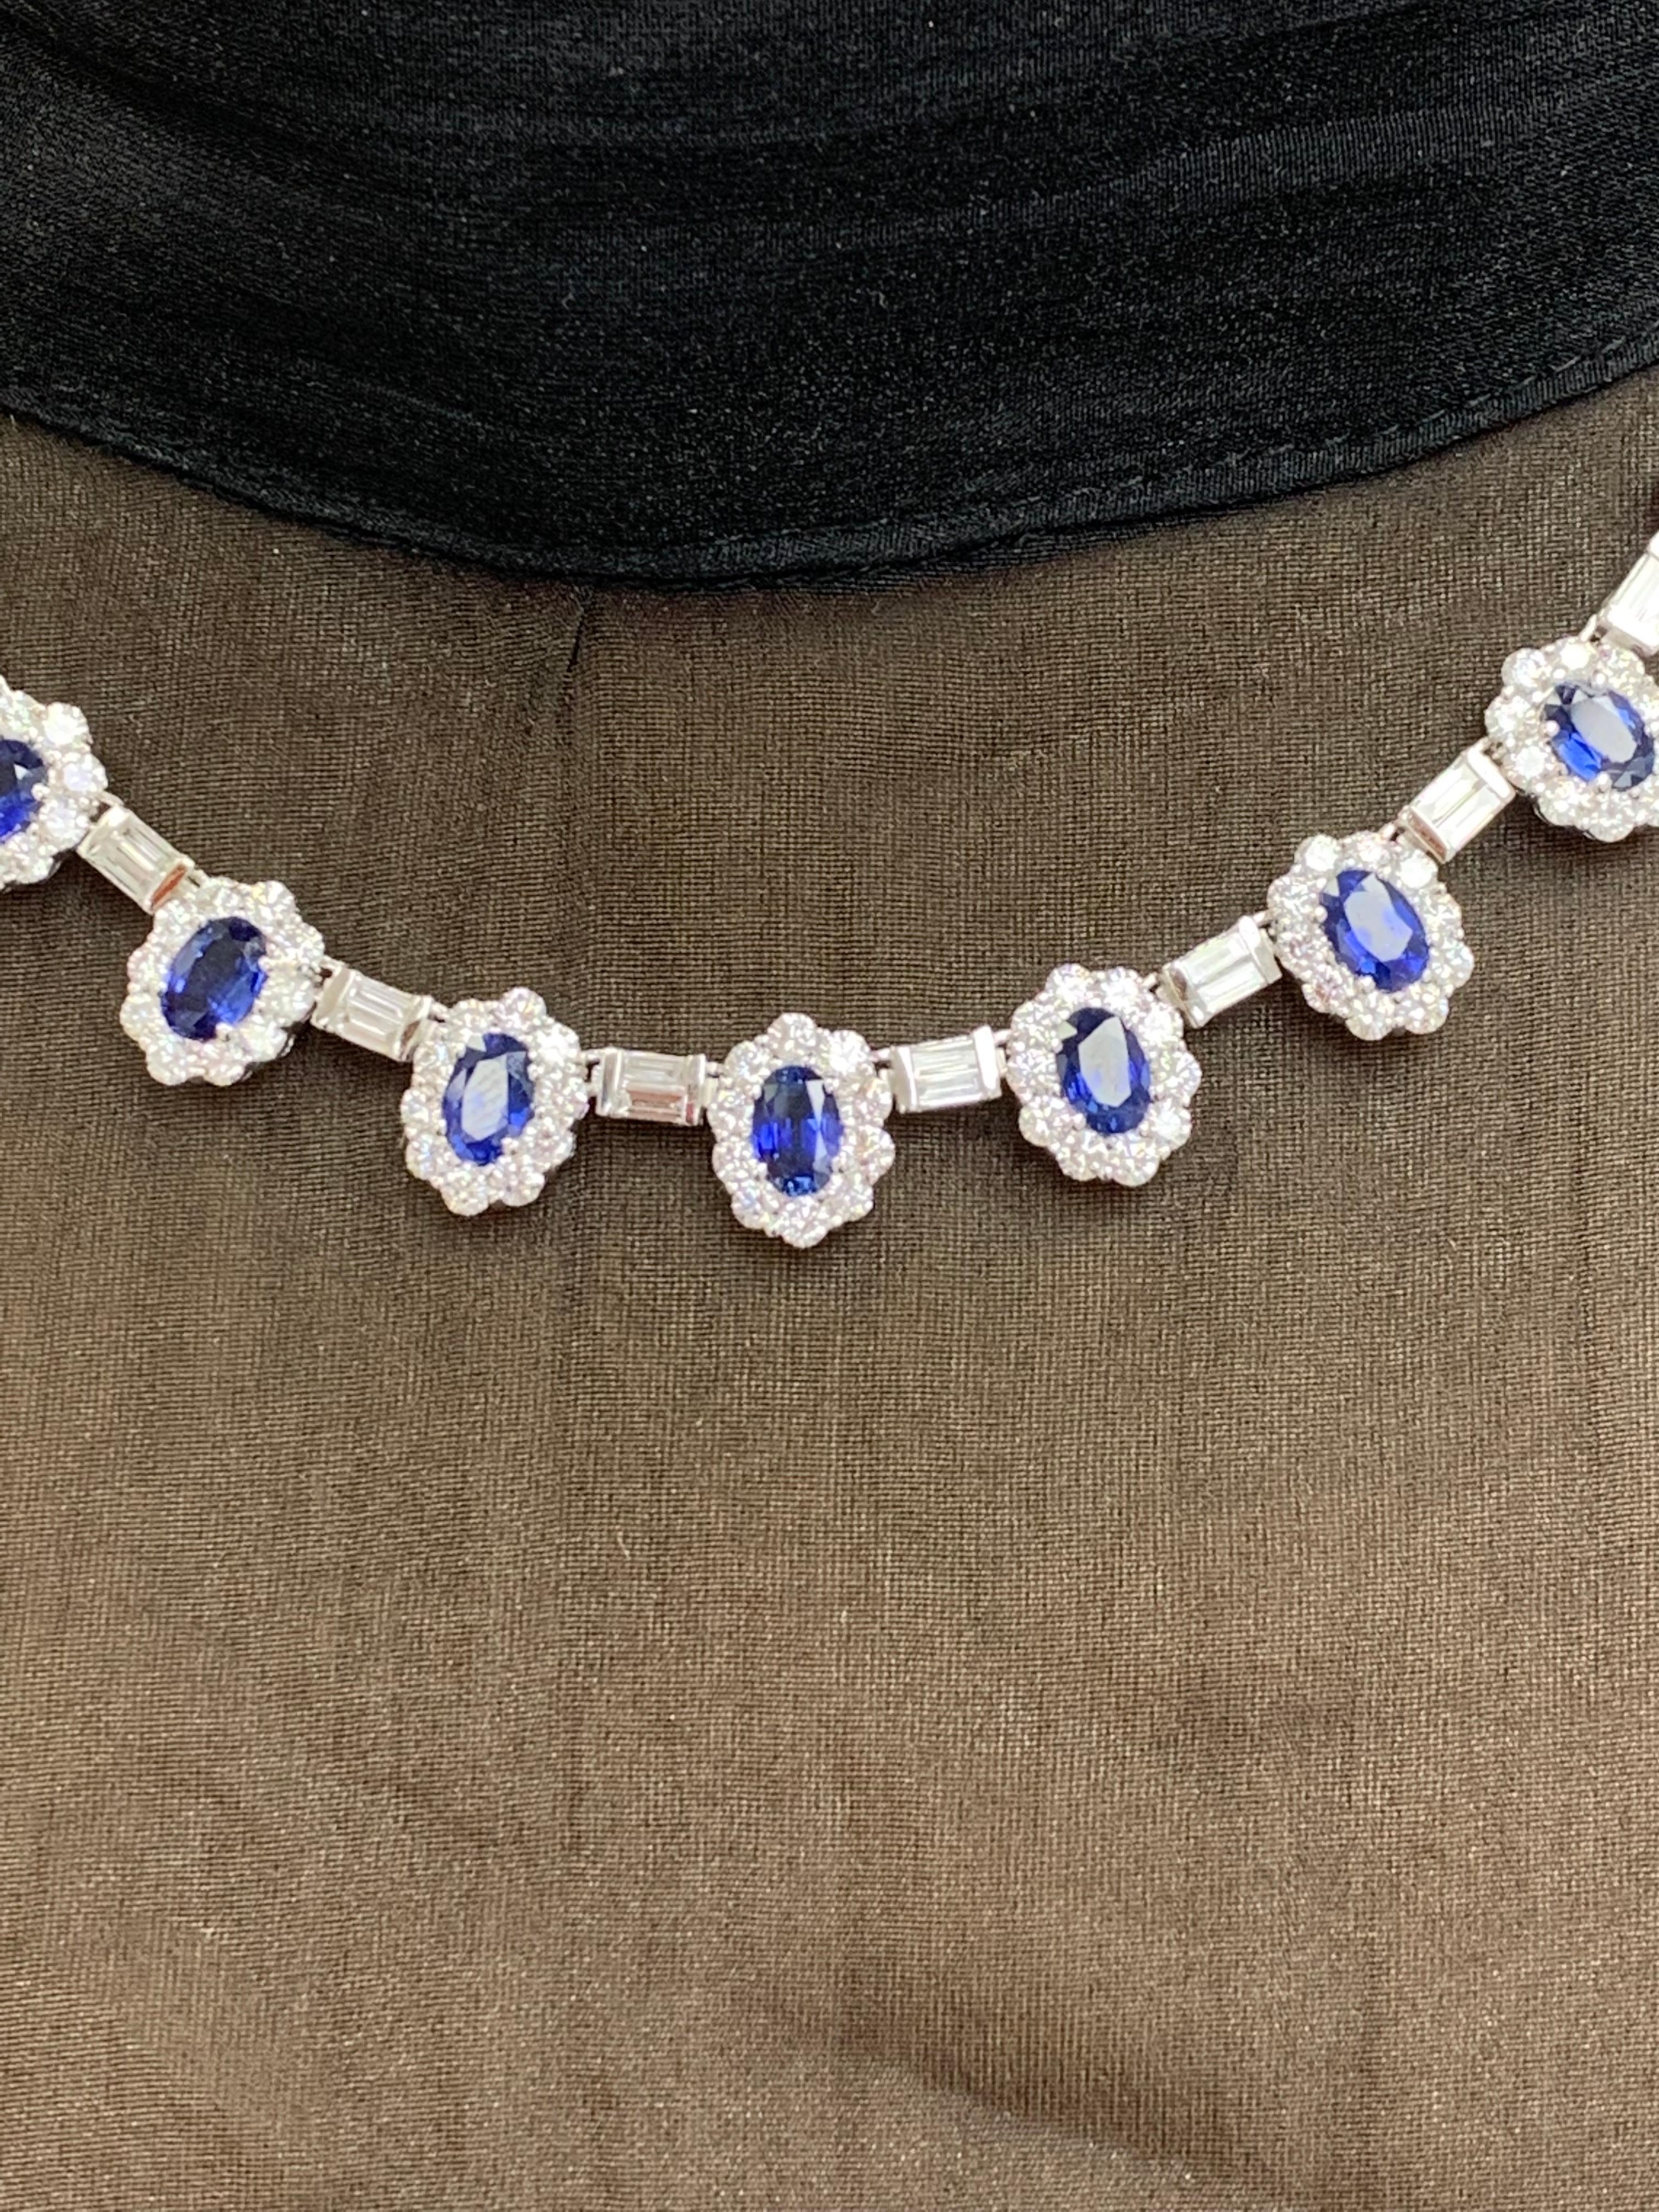 12.74 Carat Oval Cut Blue Sapphire and Diamond Necklace in 18K White Gold For Sale 4